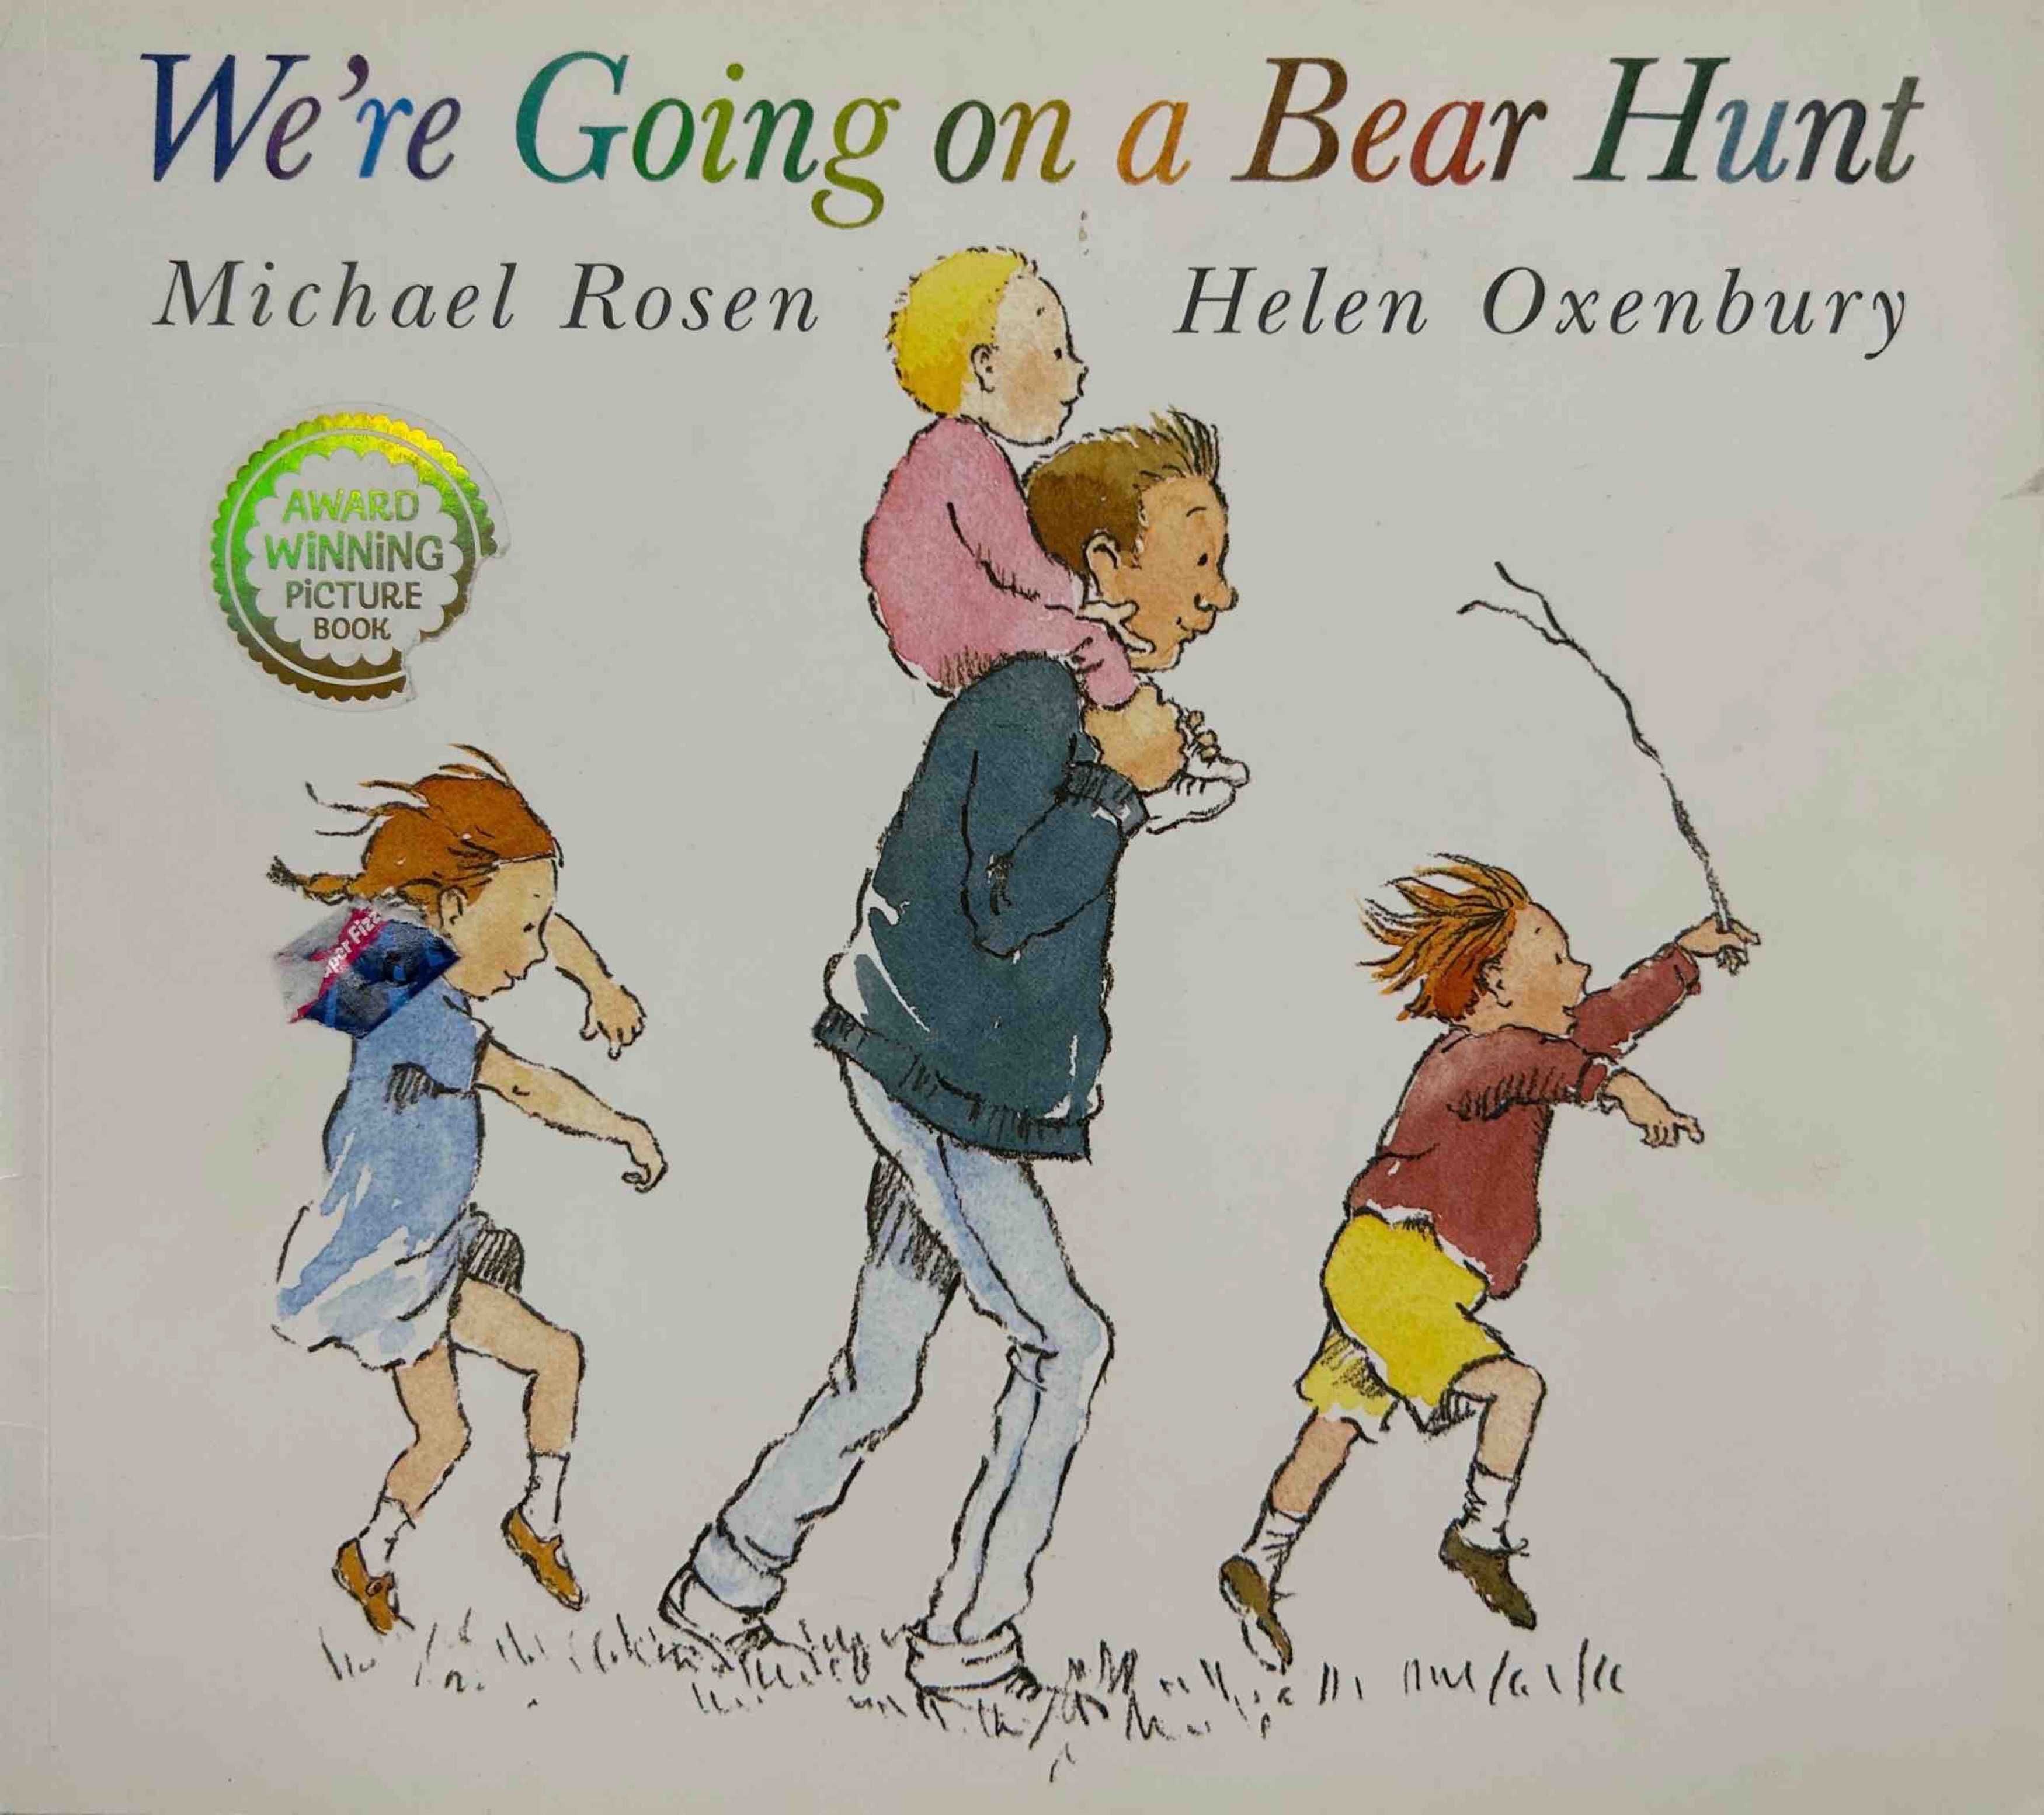 We' re Going on a Bear Hunt